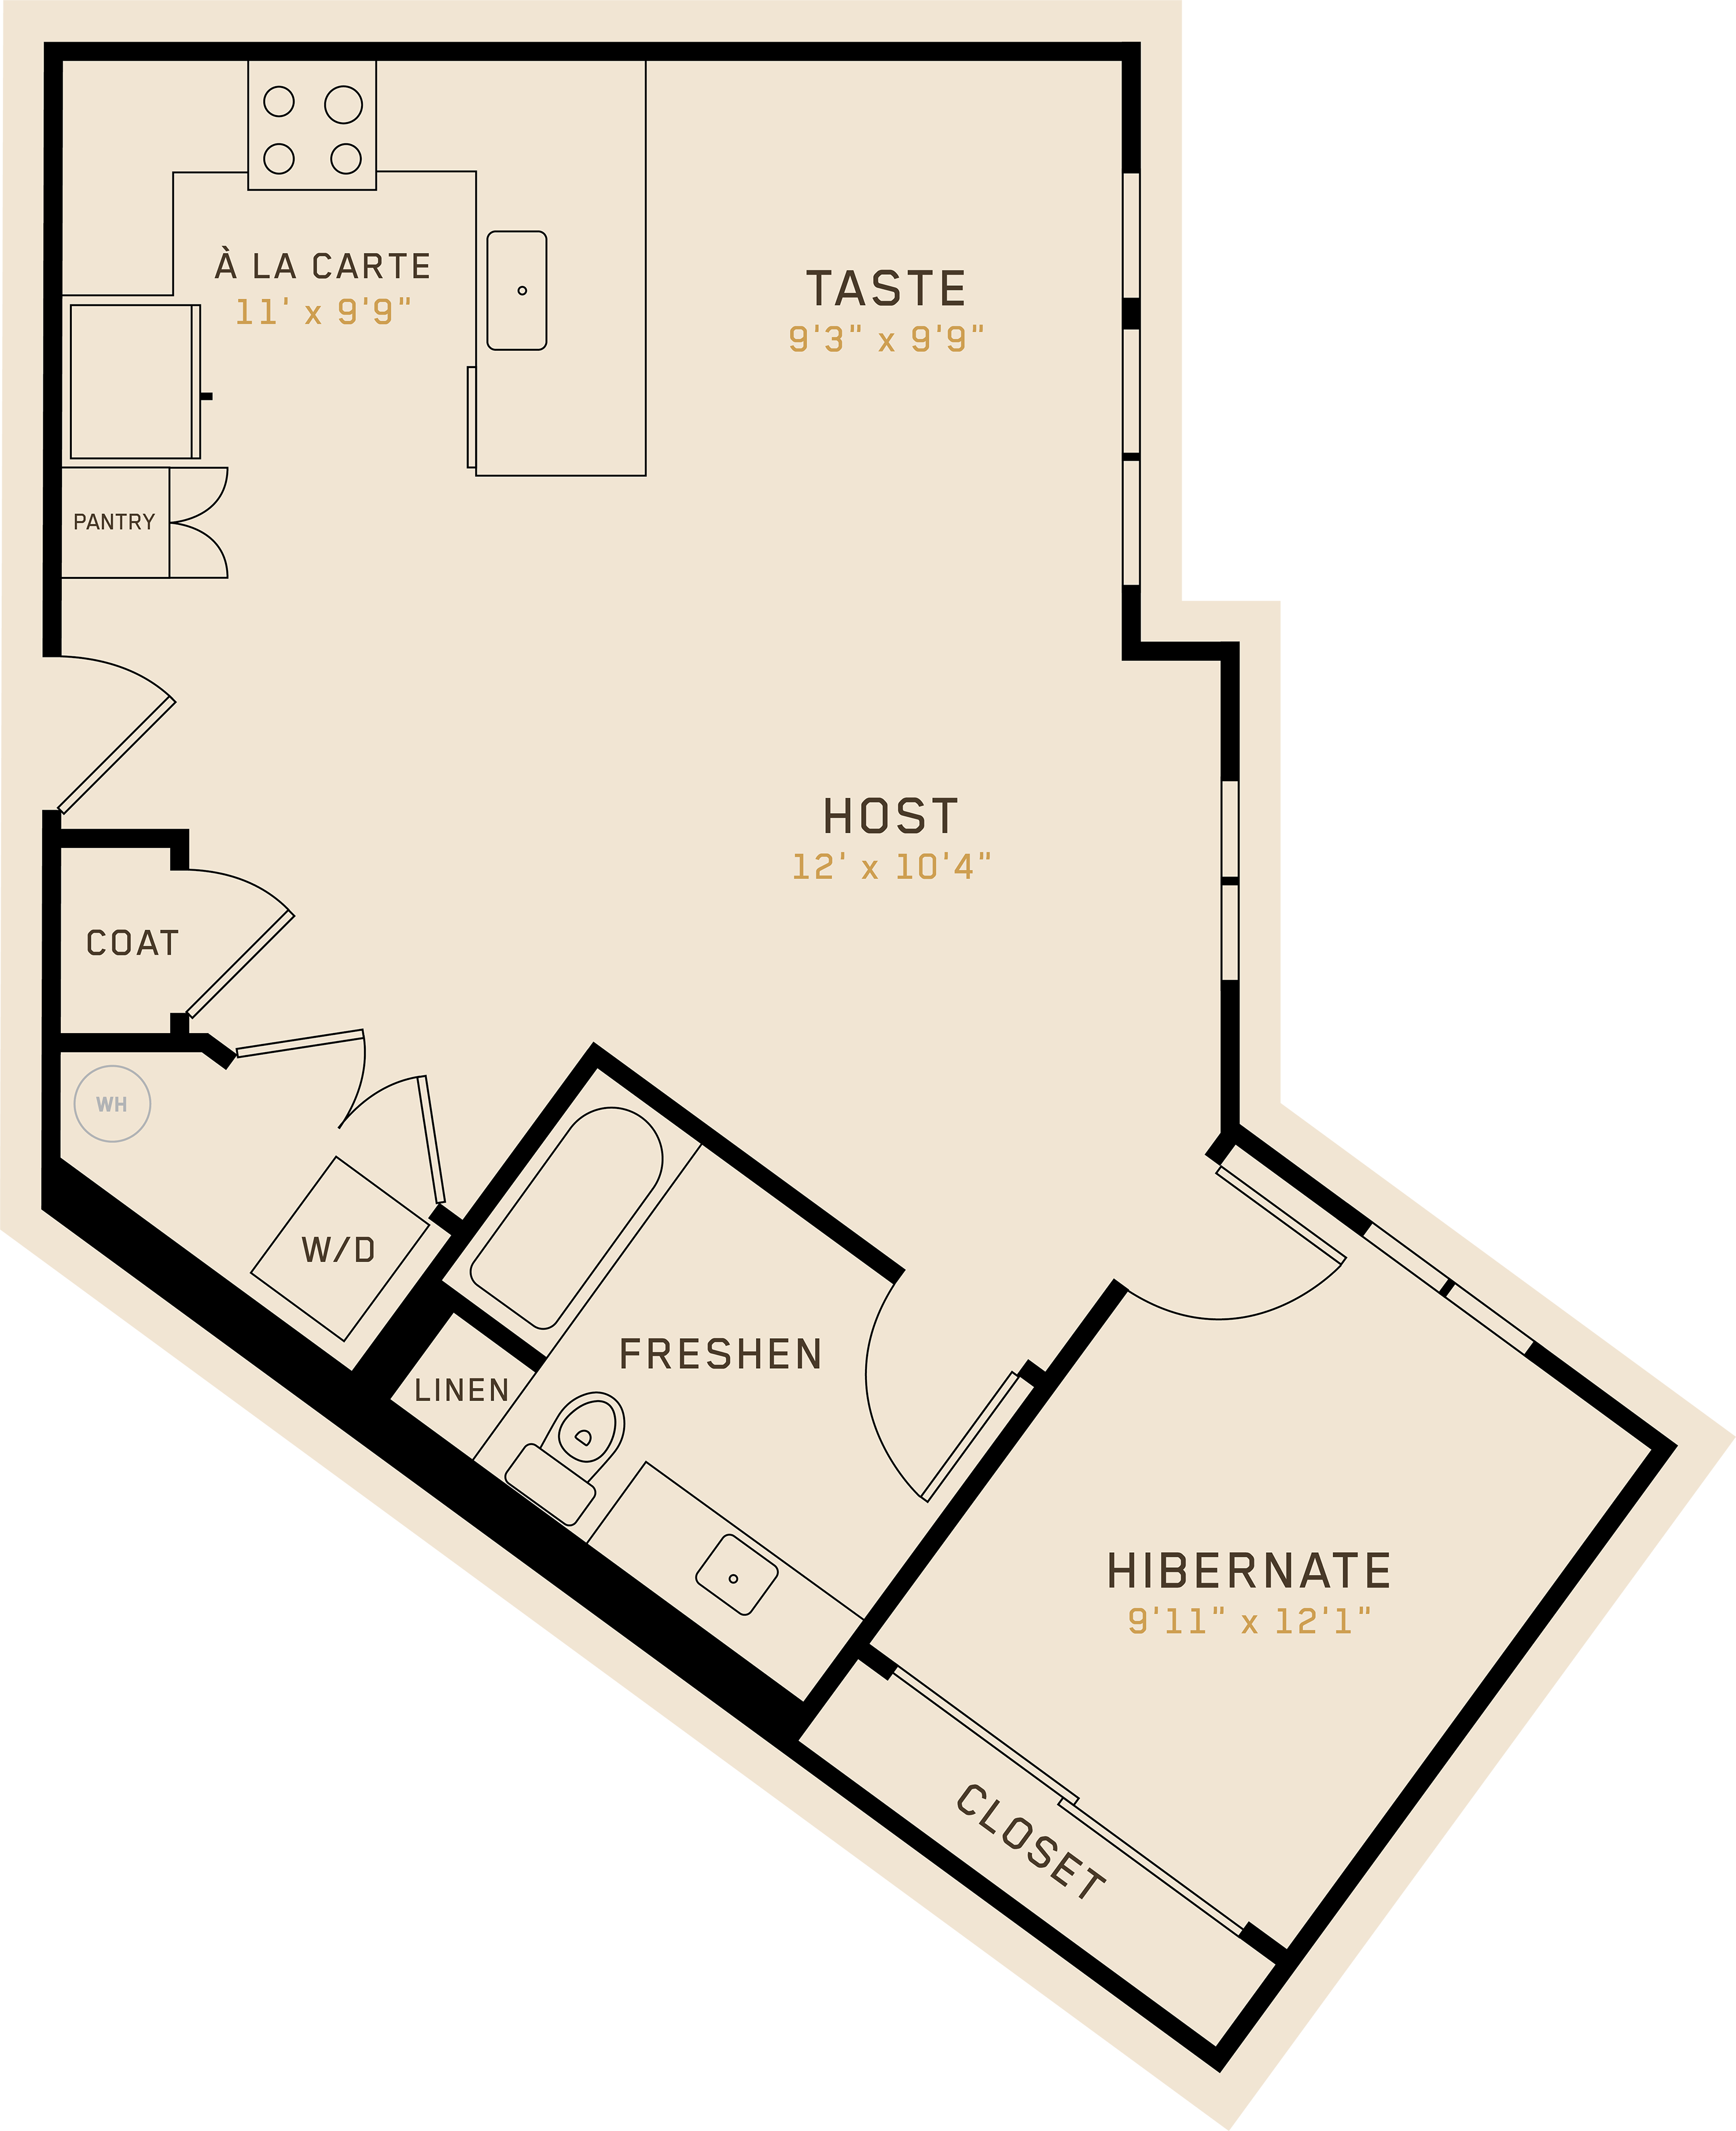 A1L floor plan featuring 1 bedroom, 1 bathroom, and is 829 square feet